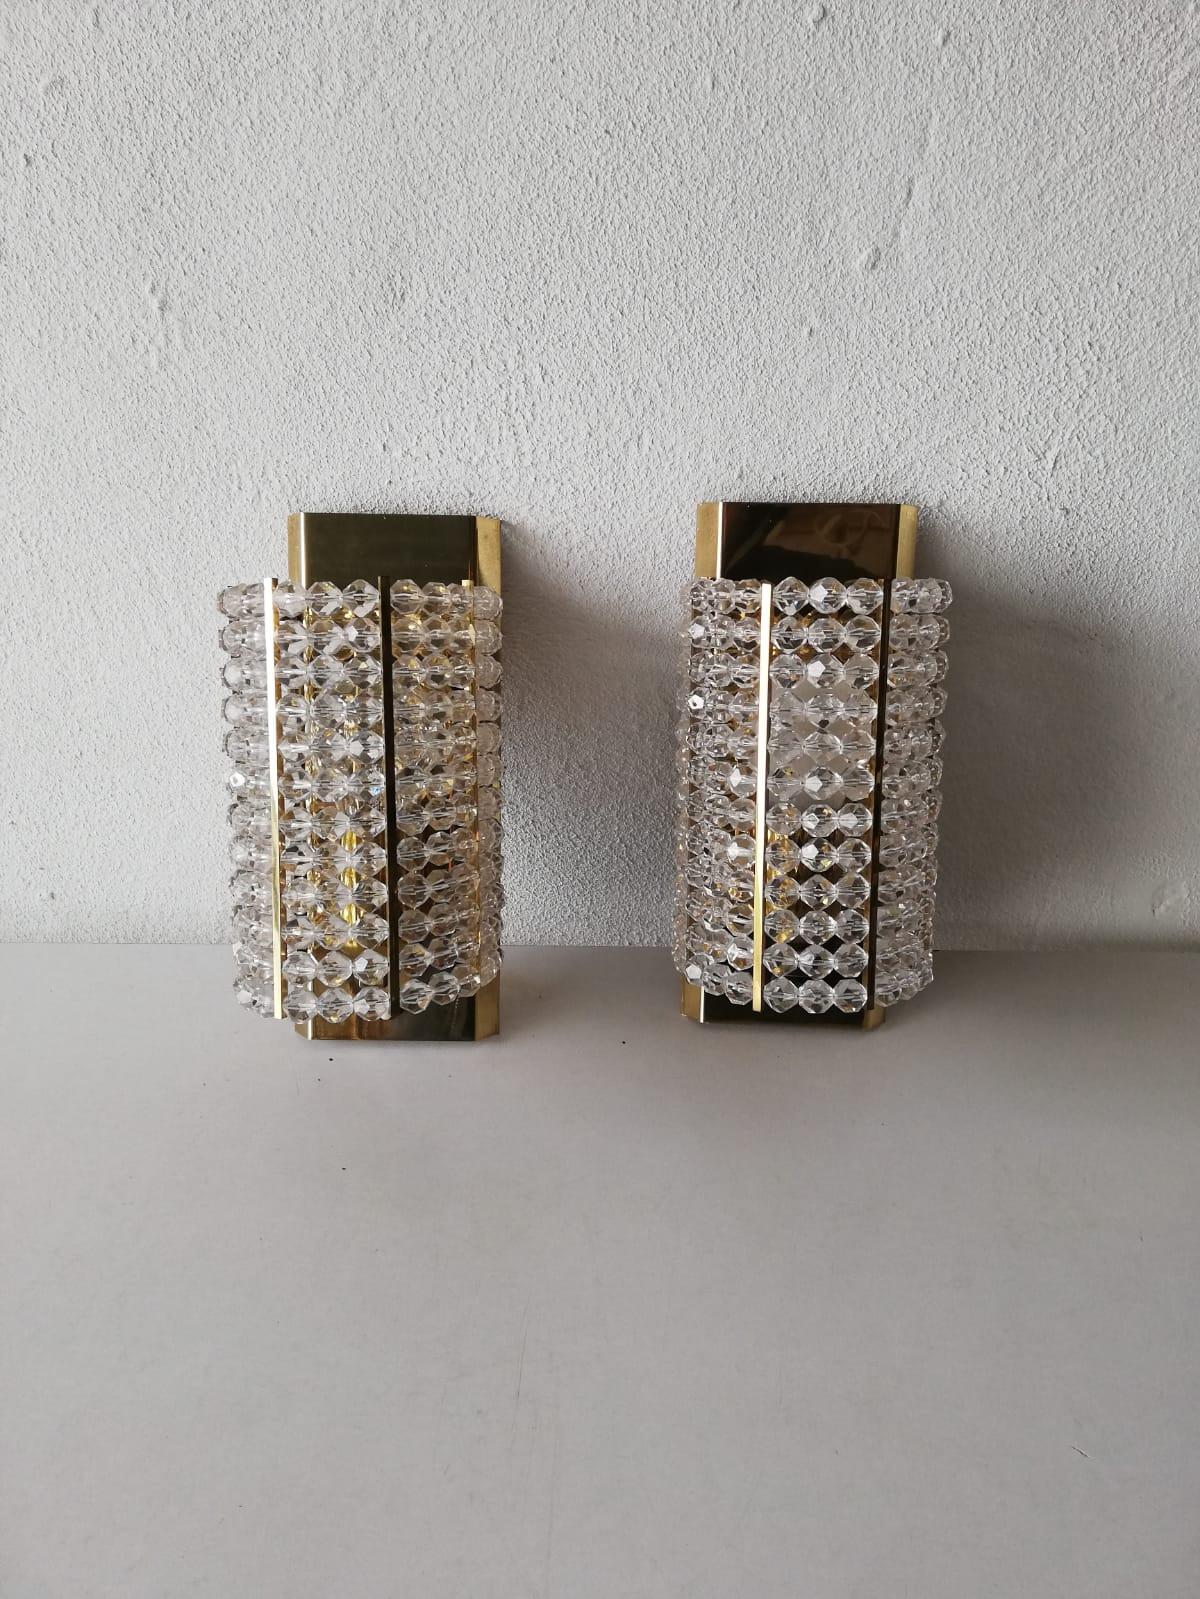 Plexiglass pair of sconces by Emil Stejnar for Rupert Nikoll, 1960s Austria

All plexiglass beads are completed.

Very nice high quality wall lamps.

Frames are made of brass.
Switch on-off button on the brass base.

Lamps are in very good